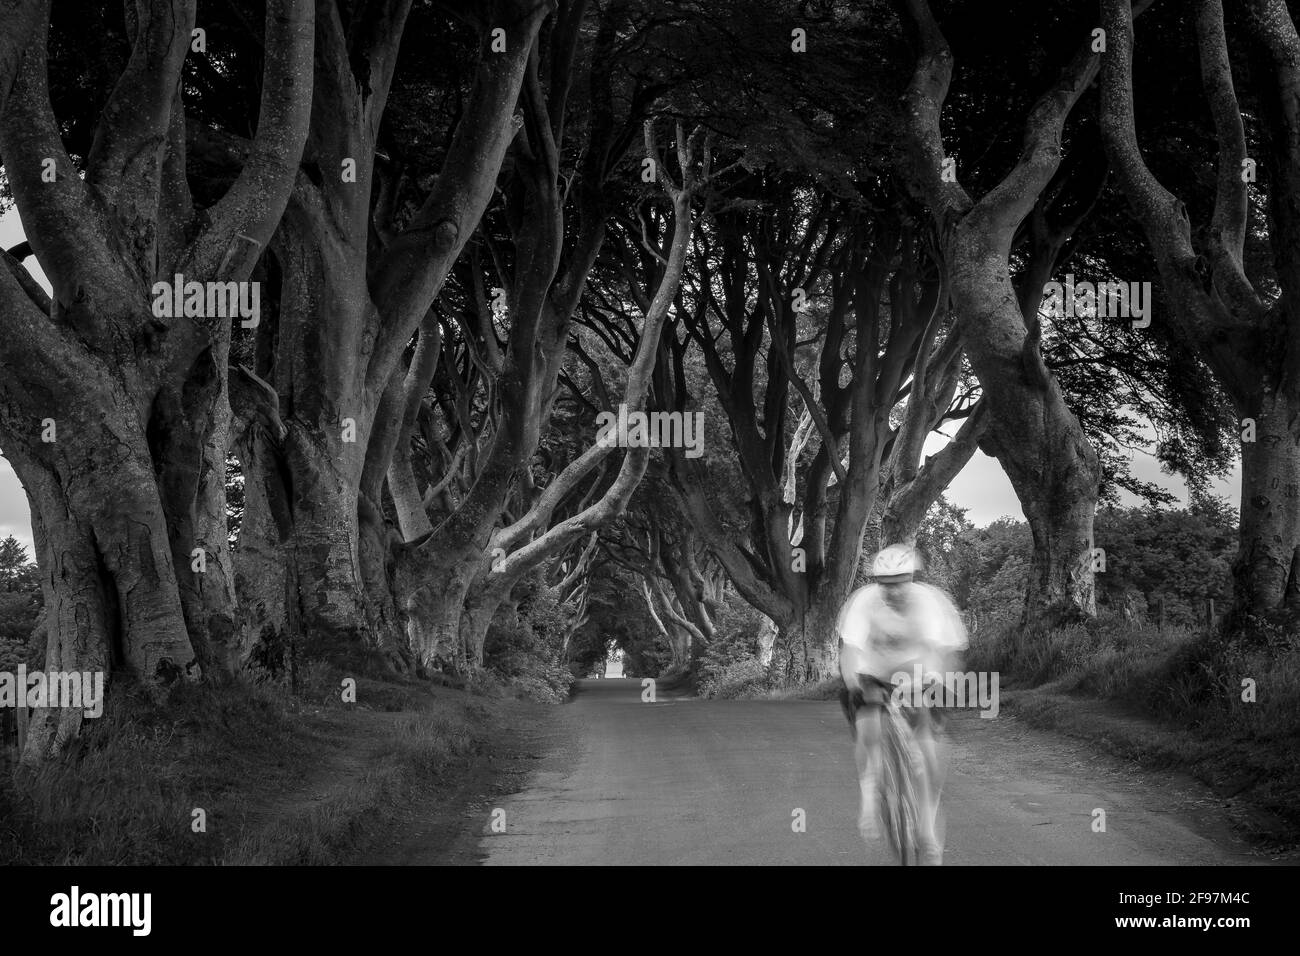 Majestic 18th Century Beech Tree lined road known as the Dark Hedges - famous location from HBO tv series Game of Thrones at sunrise - near Ballymoney, Northern Ireland and a blurry biker in front Stock Photo